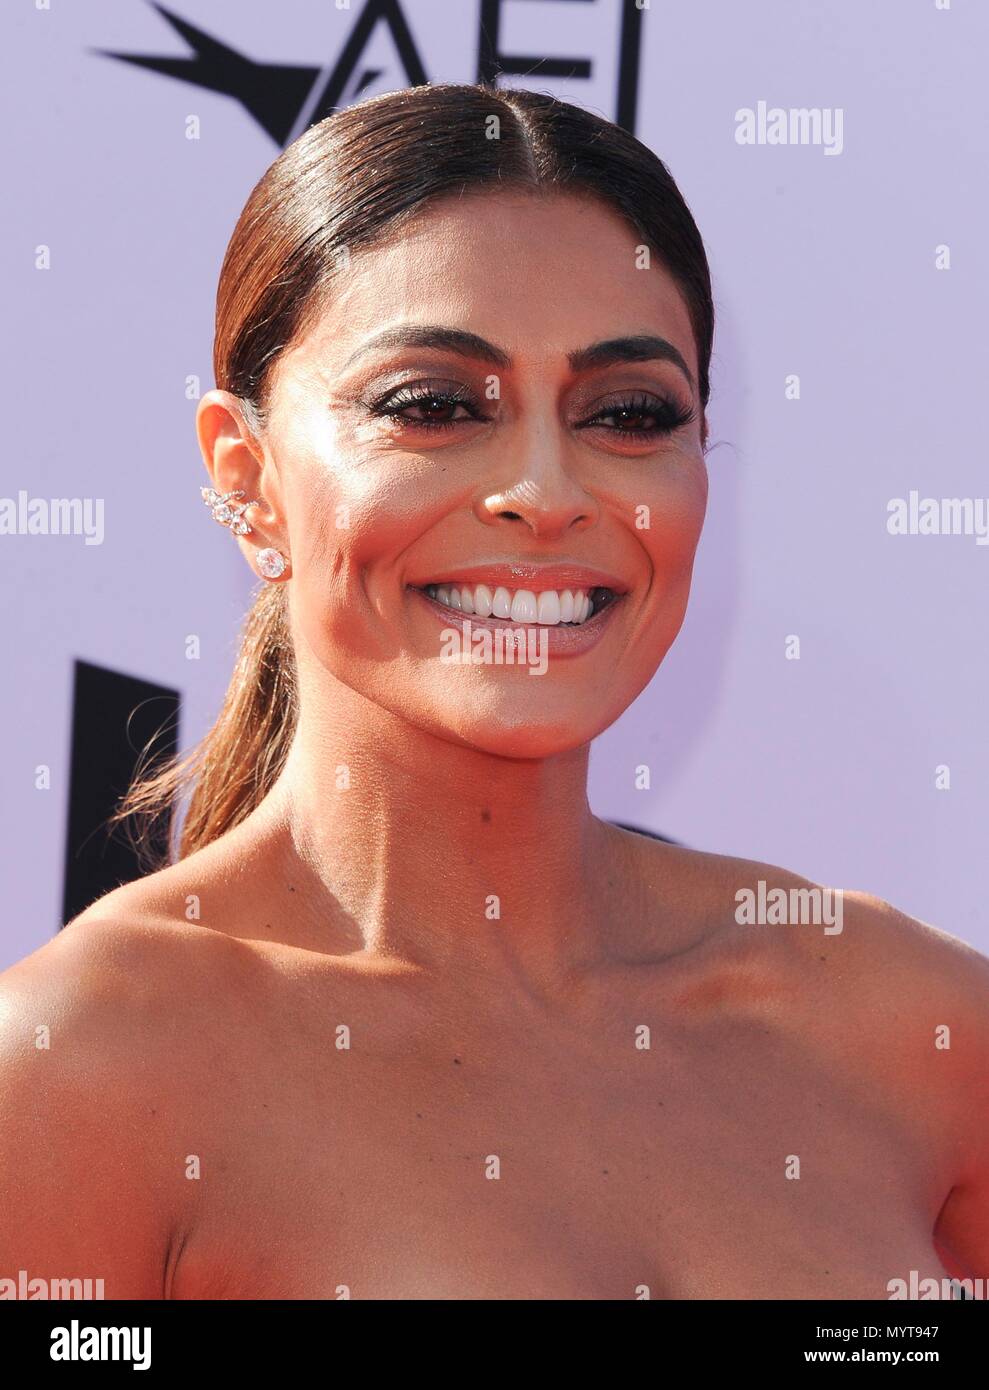 Juliana Paes at arrivals for 46th AFI Life Achievement Award Gala Tribute, Dolby Theatre, Los Angeles, CA June 7, 2018. Photo By: Elizabeth Goodenough/Everett Collection Stock Photo